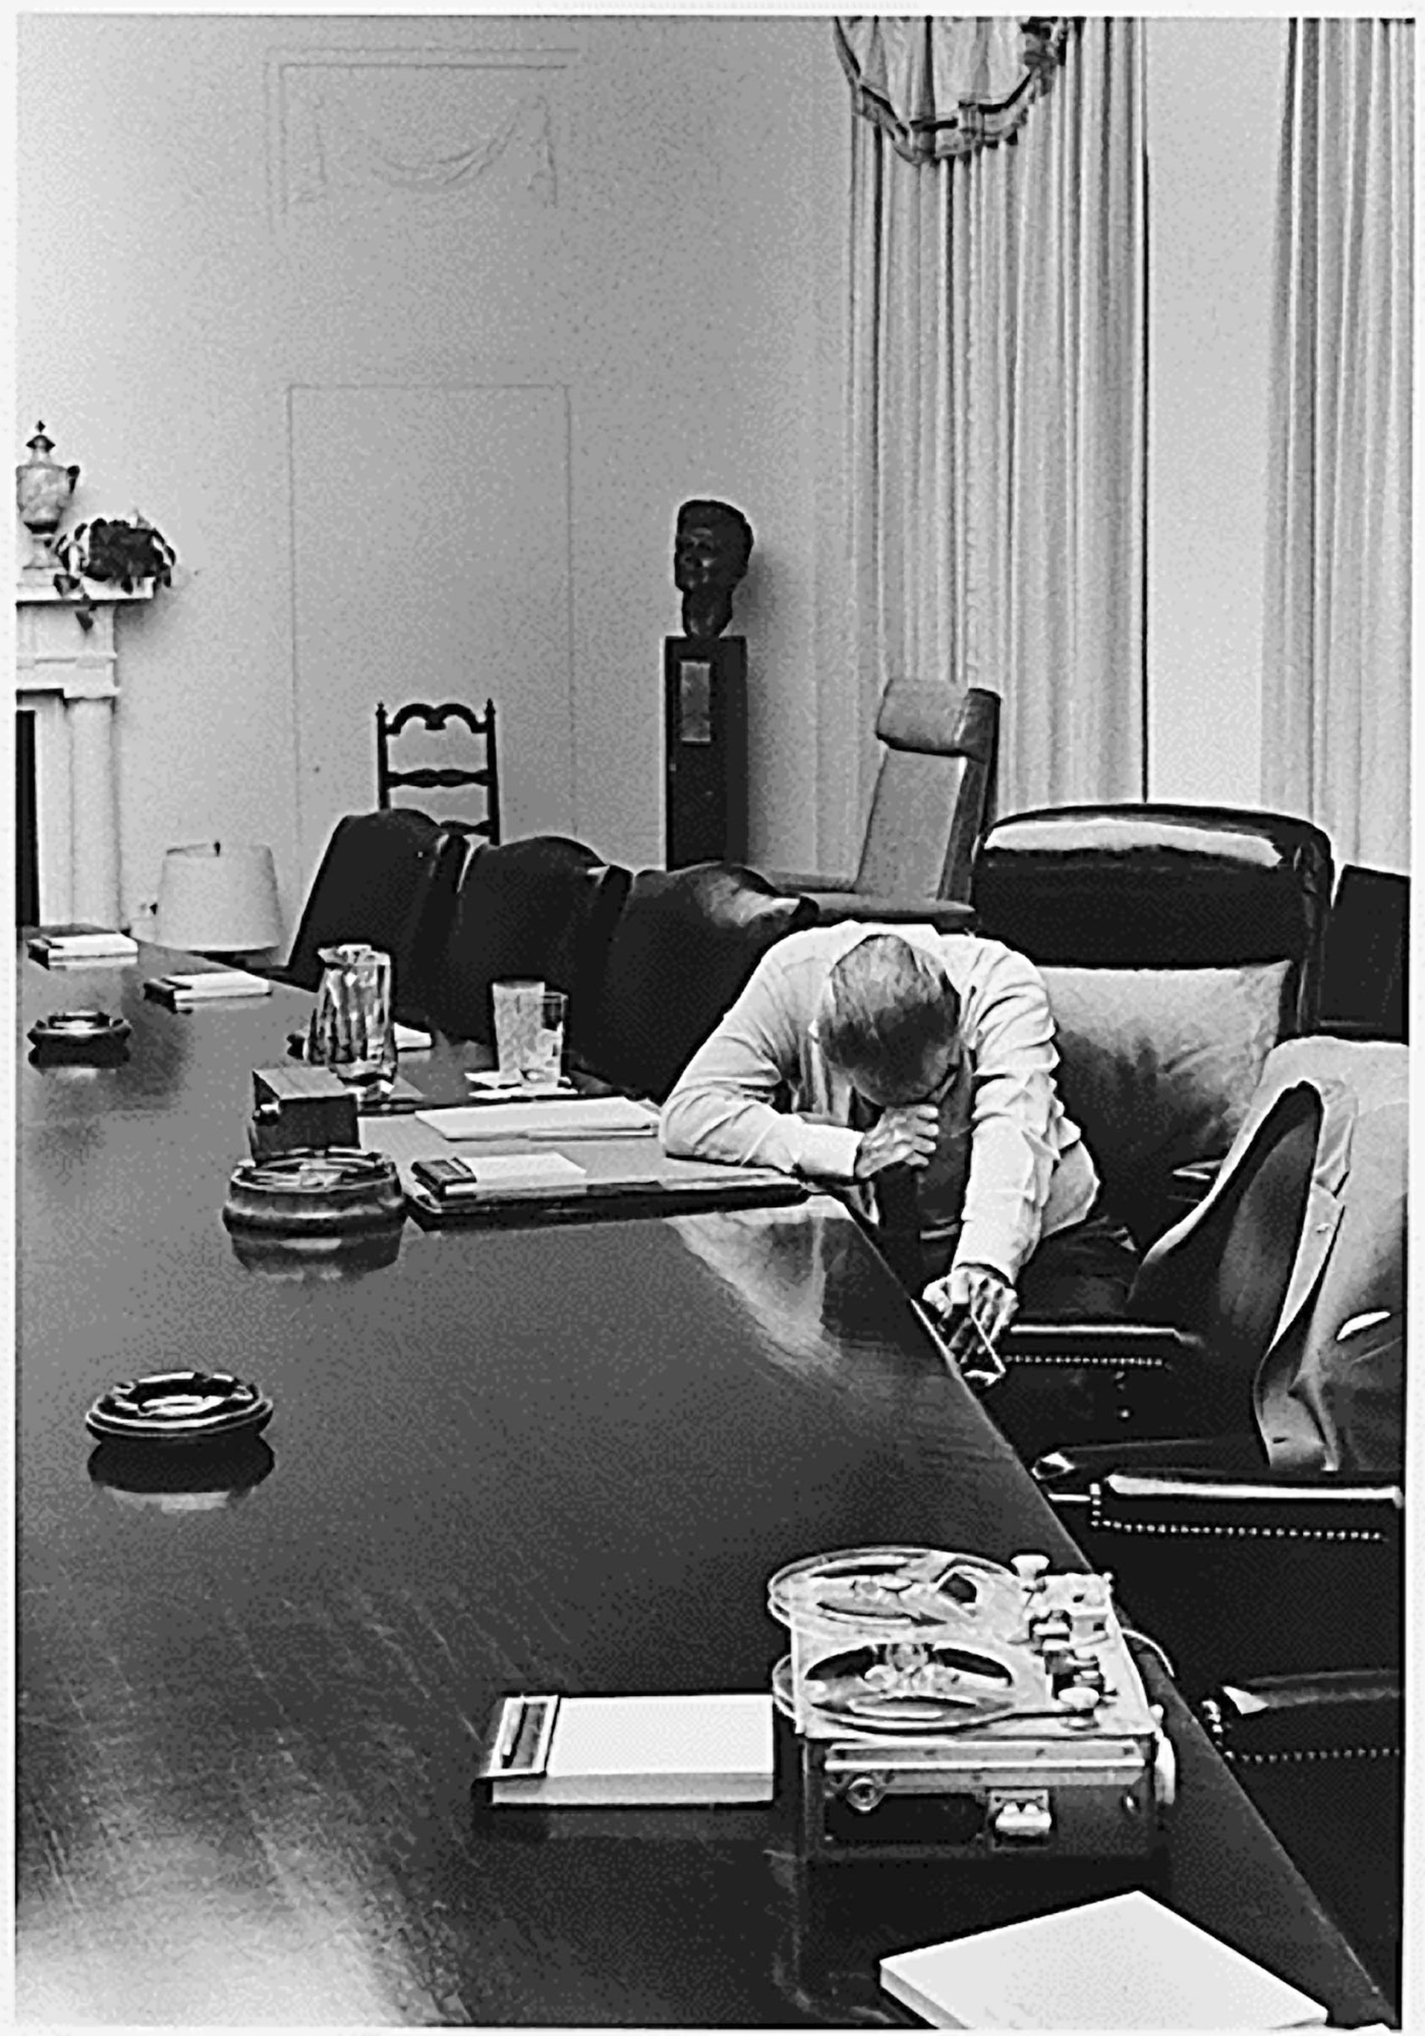 President Lyndon Johnson works during his final days at the White House in 1968. He chose not to seek another term as the Vietnam War became more unpopular.